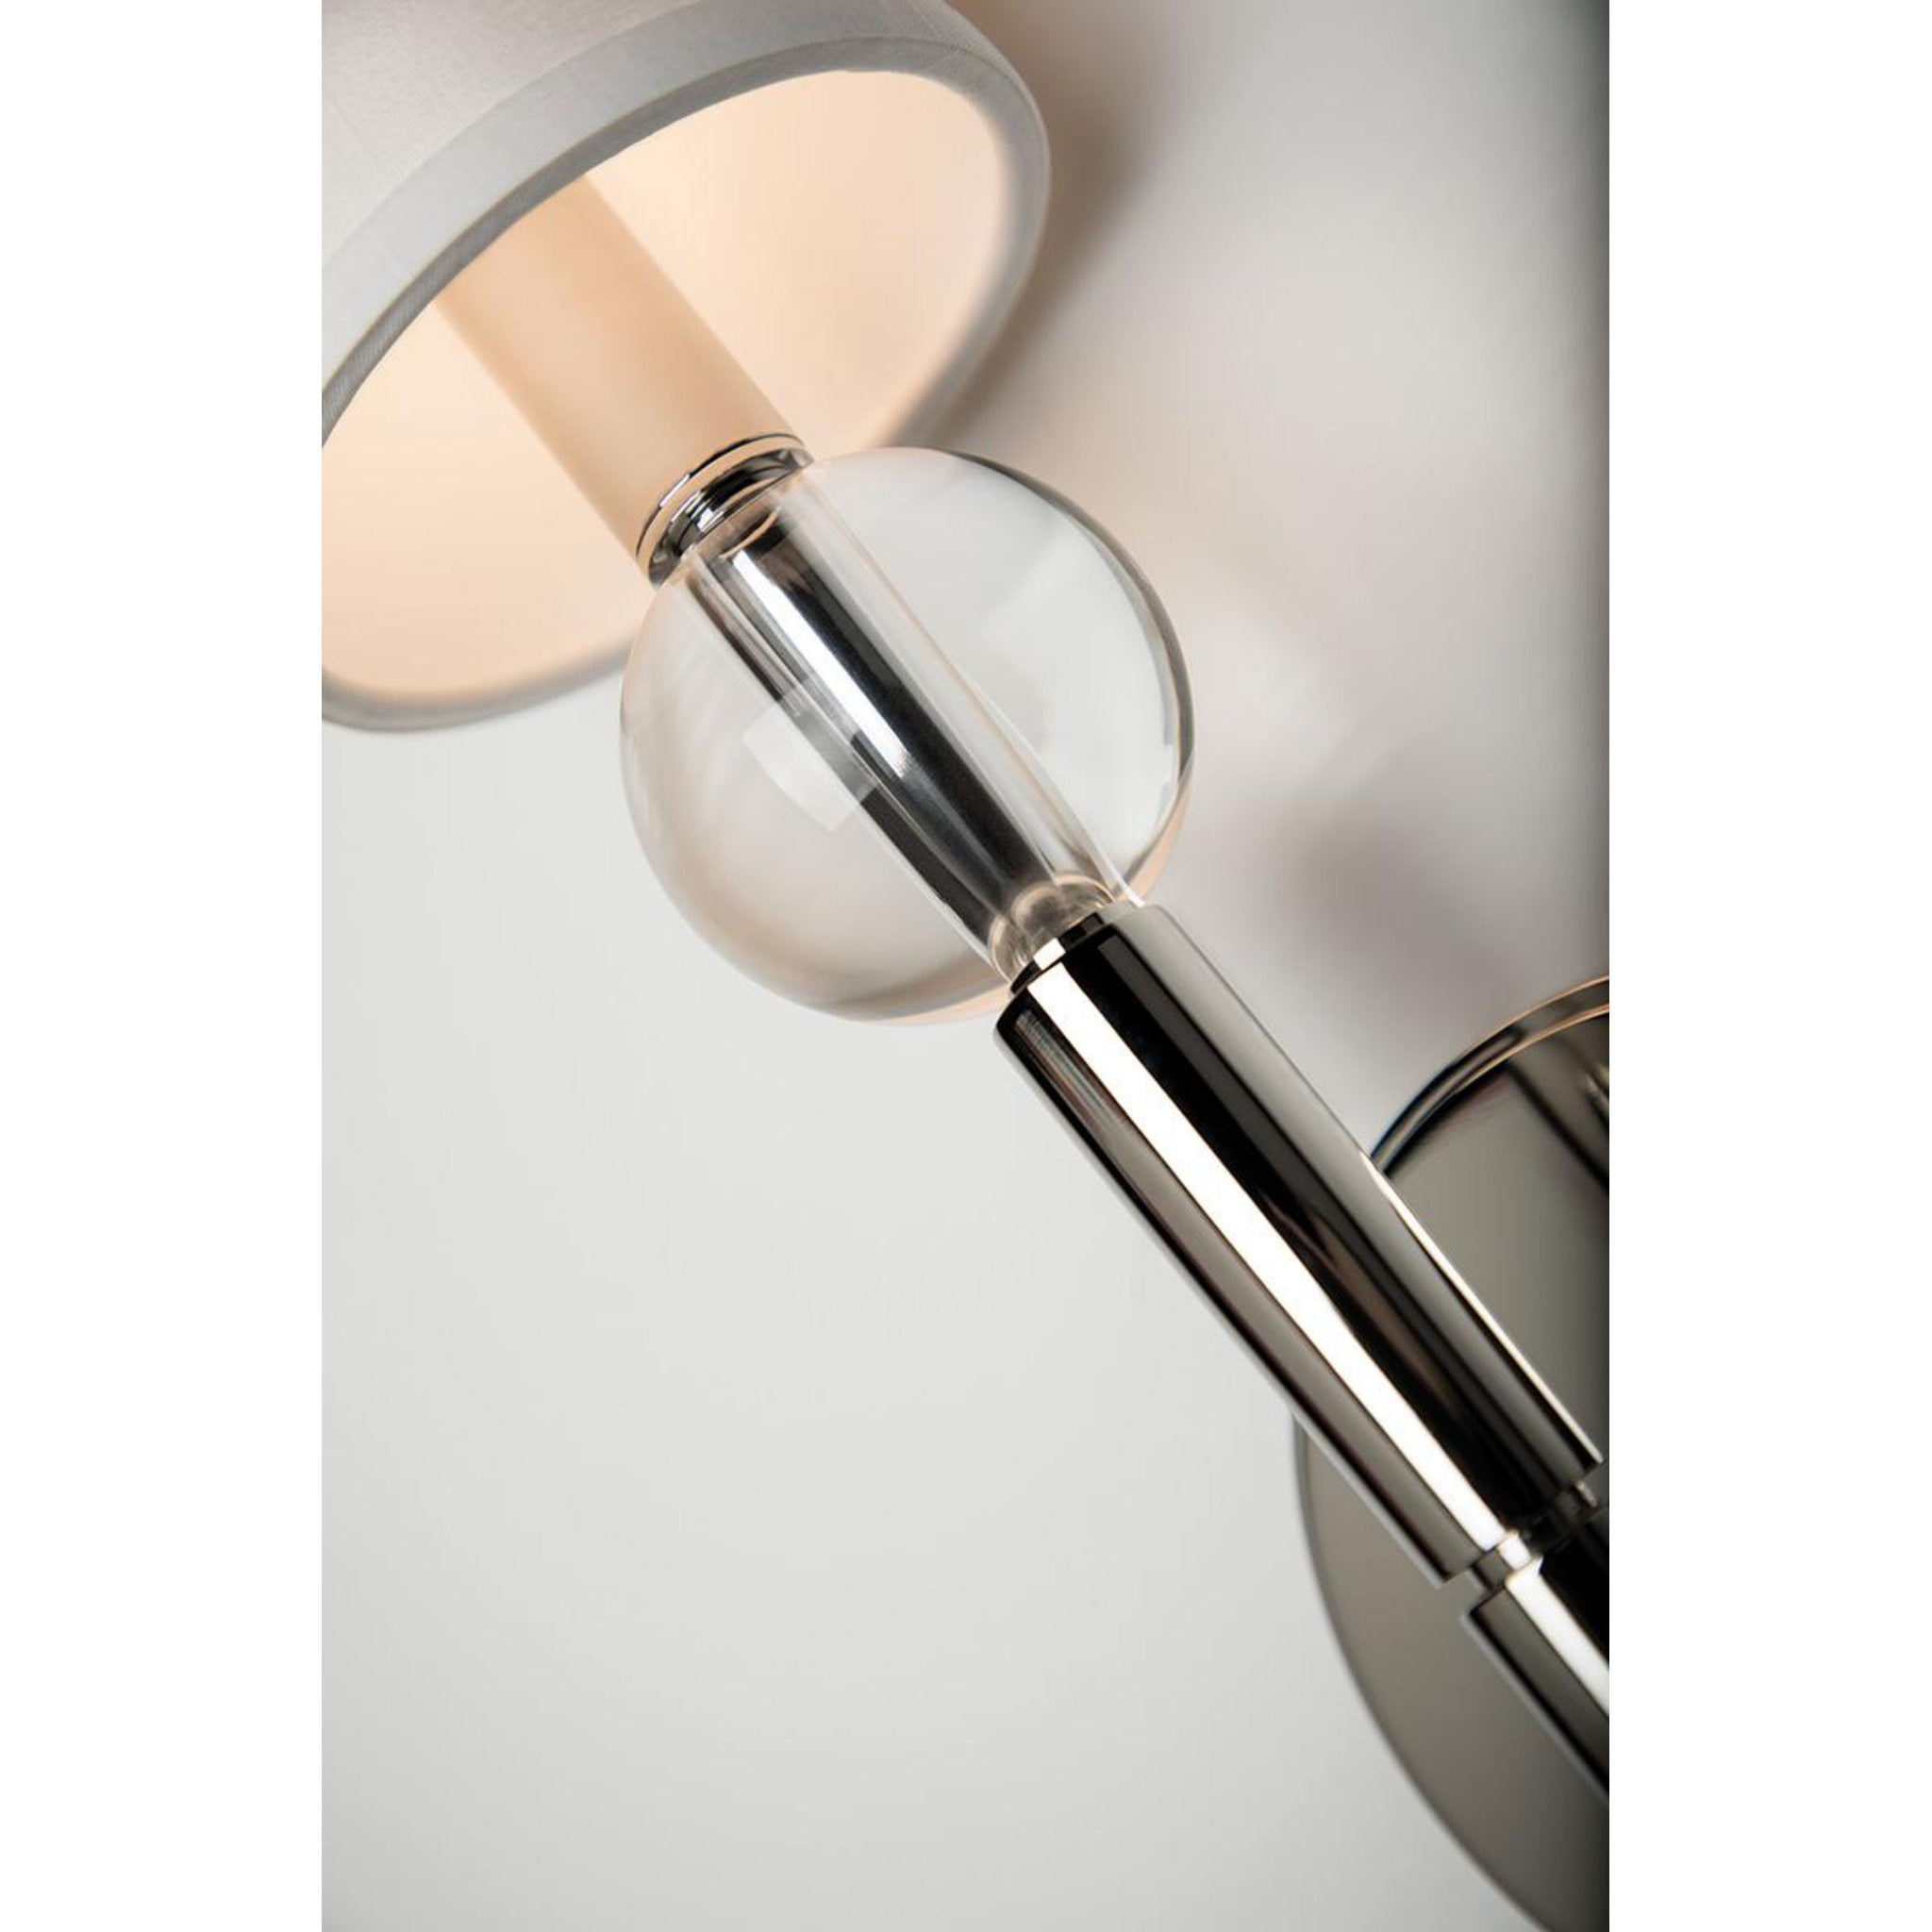 Rockland 2 Light Wall Sconce in Polished Nickel